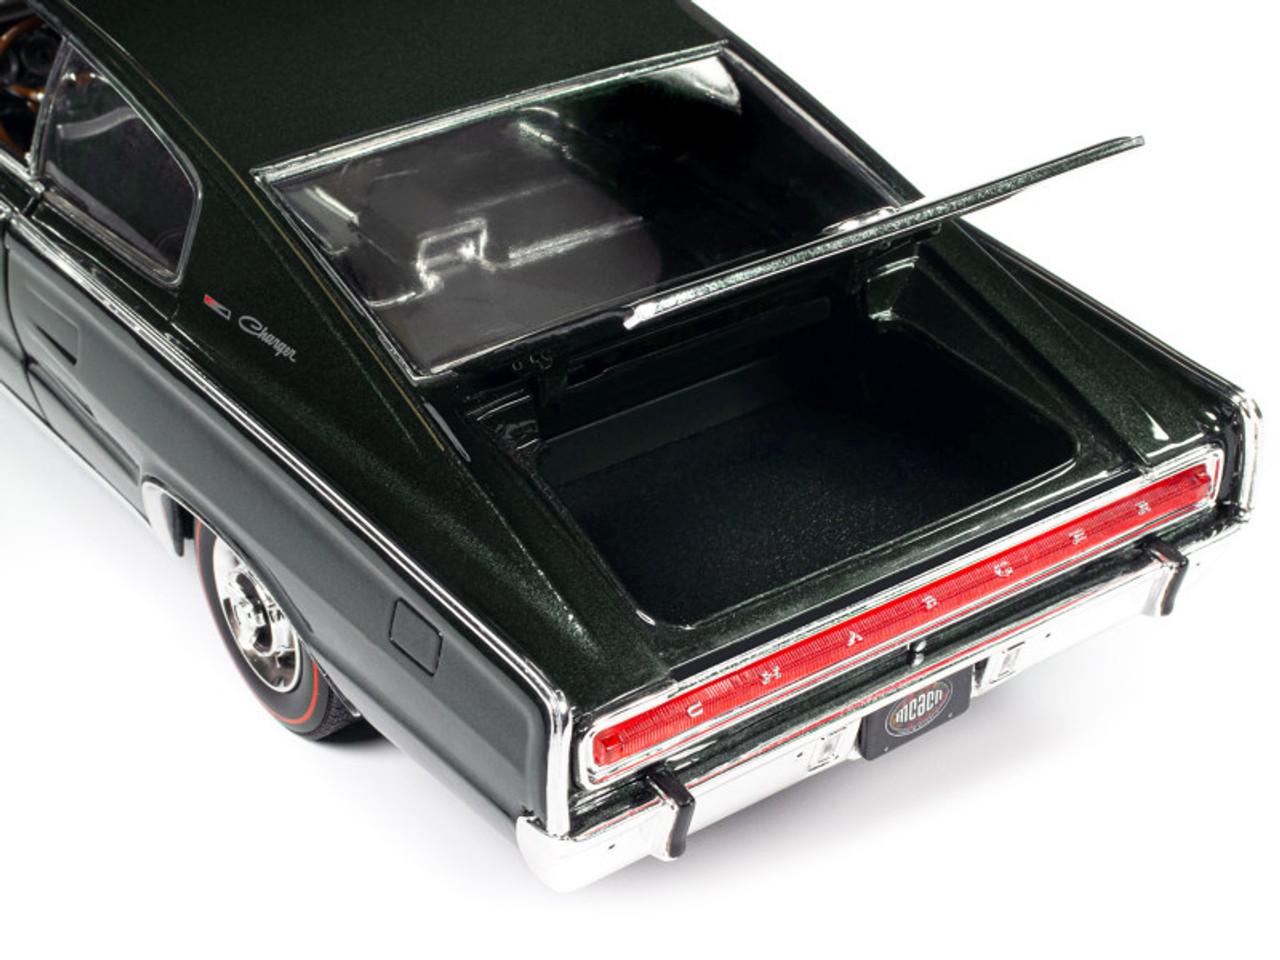 1966 Dodge Charger Dark Green Metallic "Muscle Car & Corvette Nationals" (MCACN) "American Muscle" Series 1/18 Diecast Model Car by Auto World